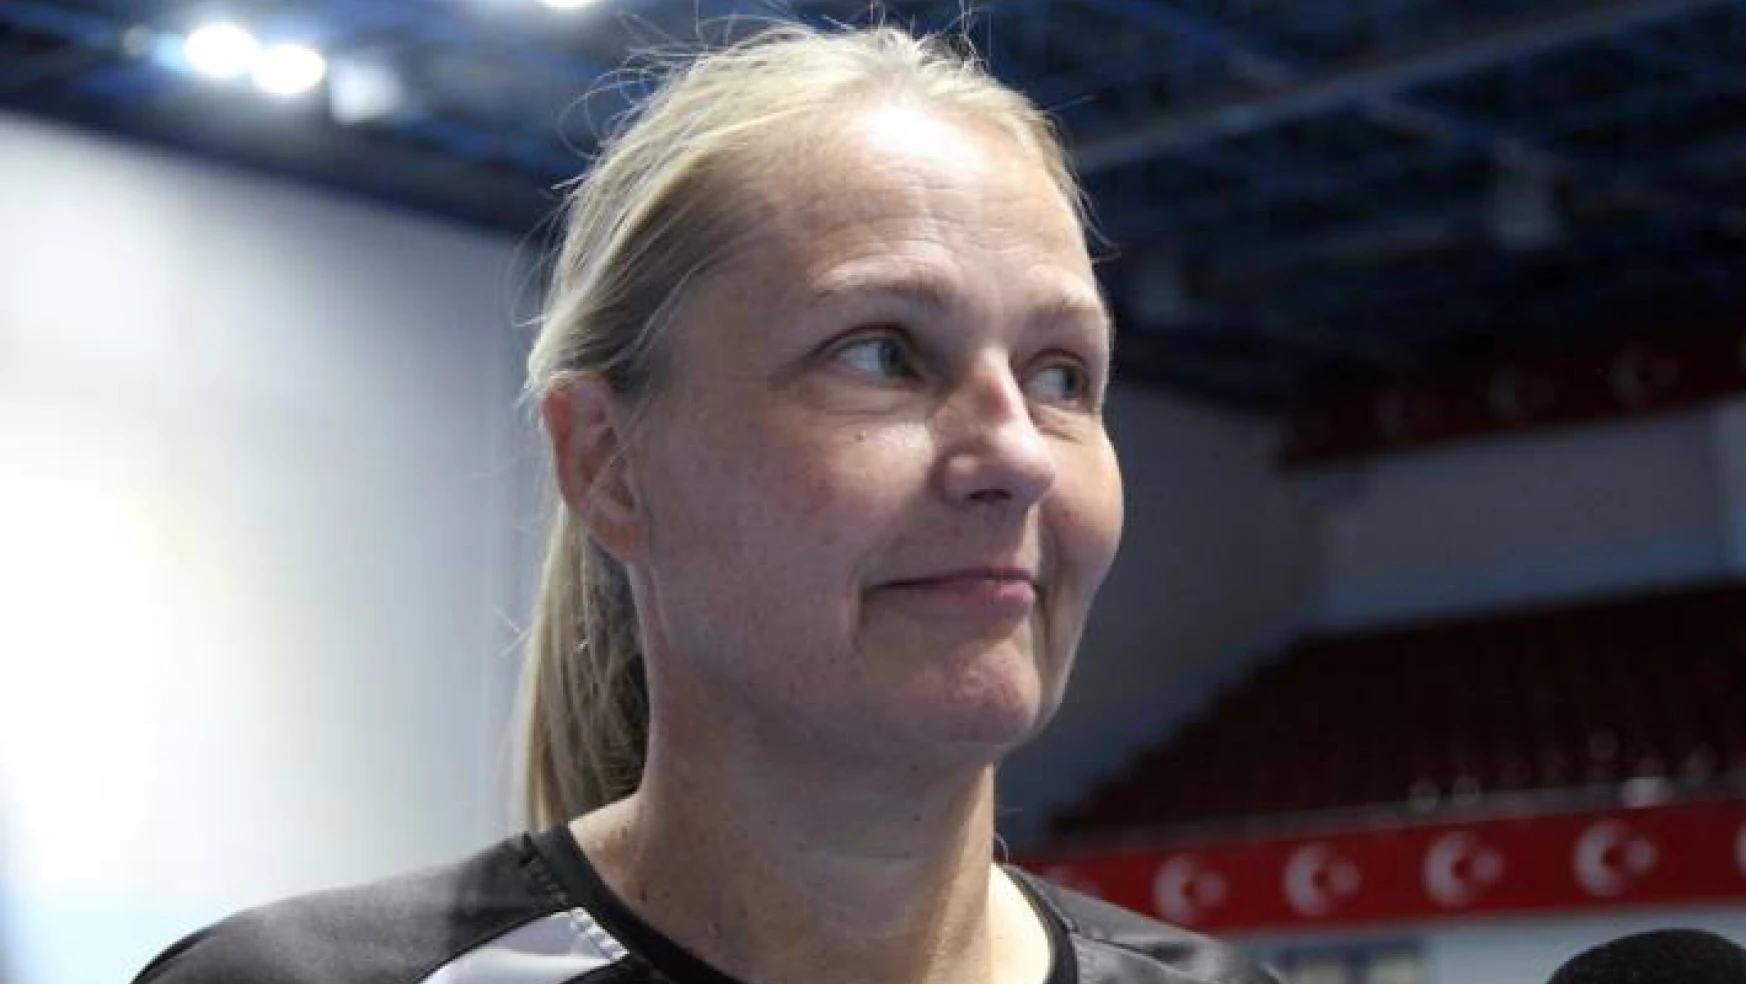 Helle Thomsen : “I want to develop a handball culture here”